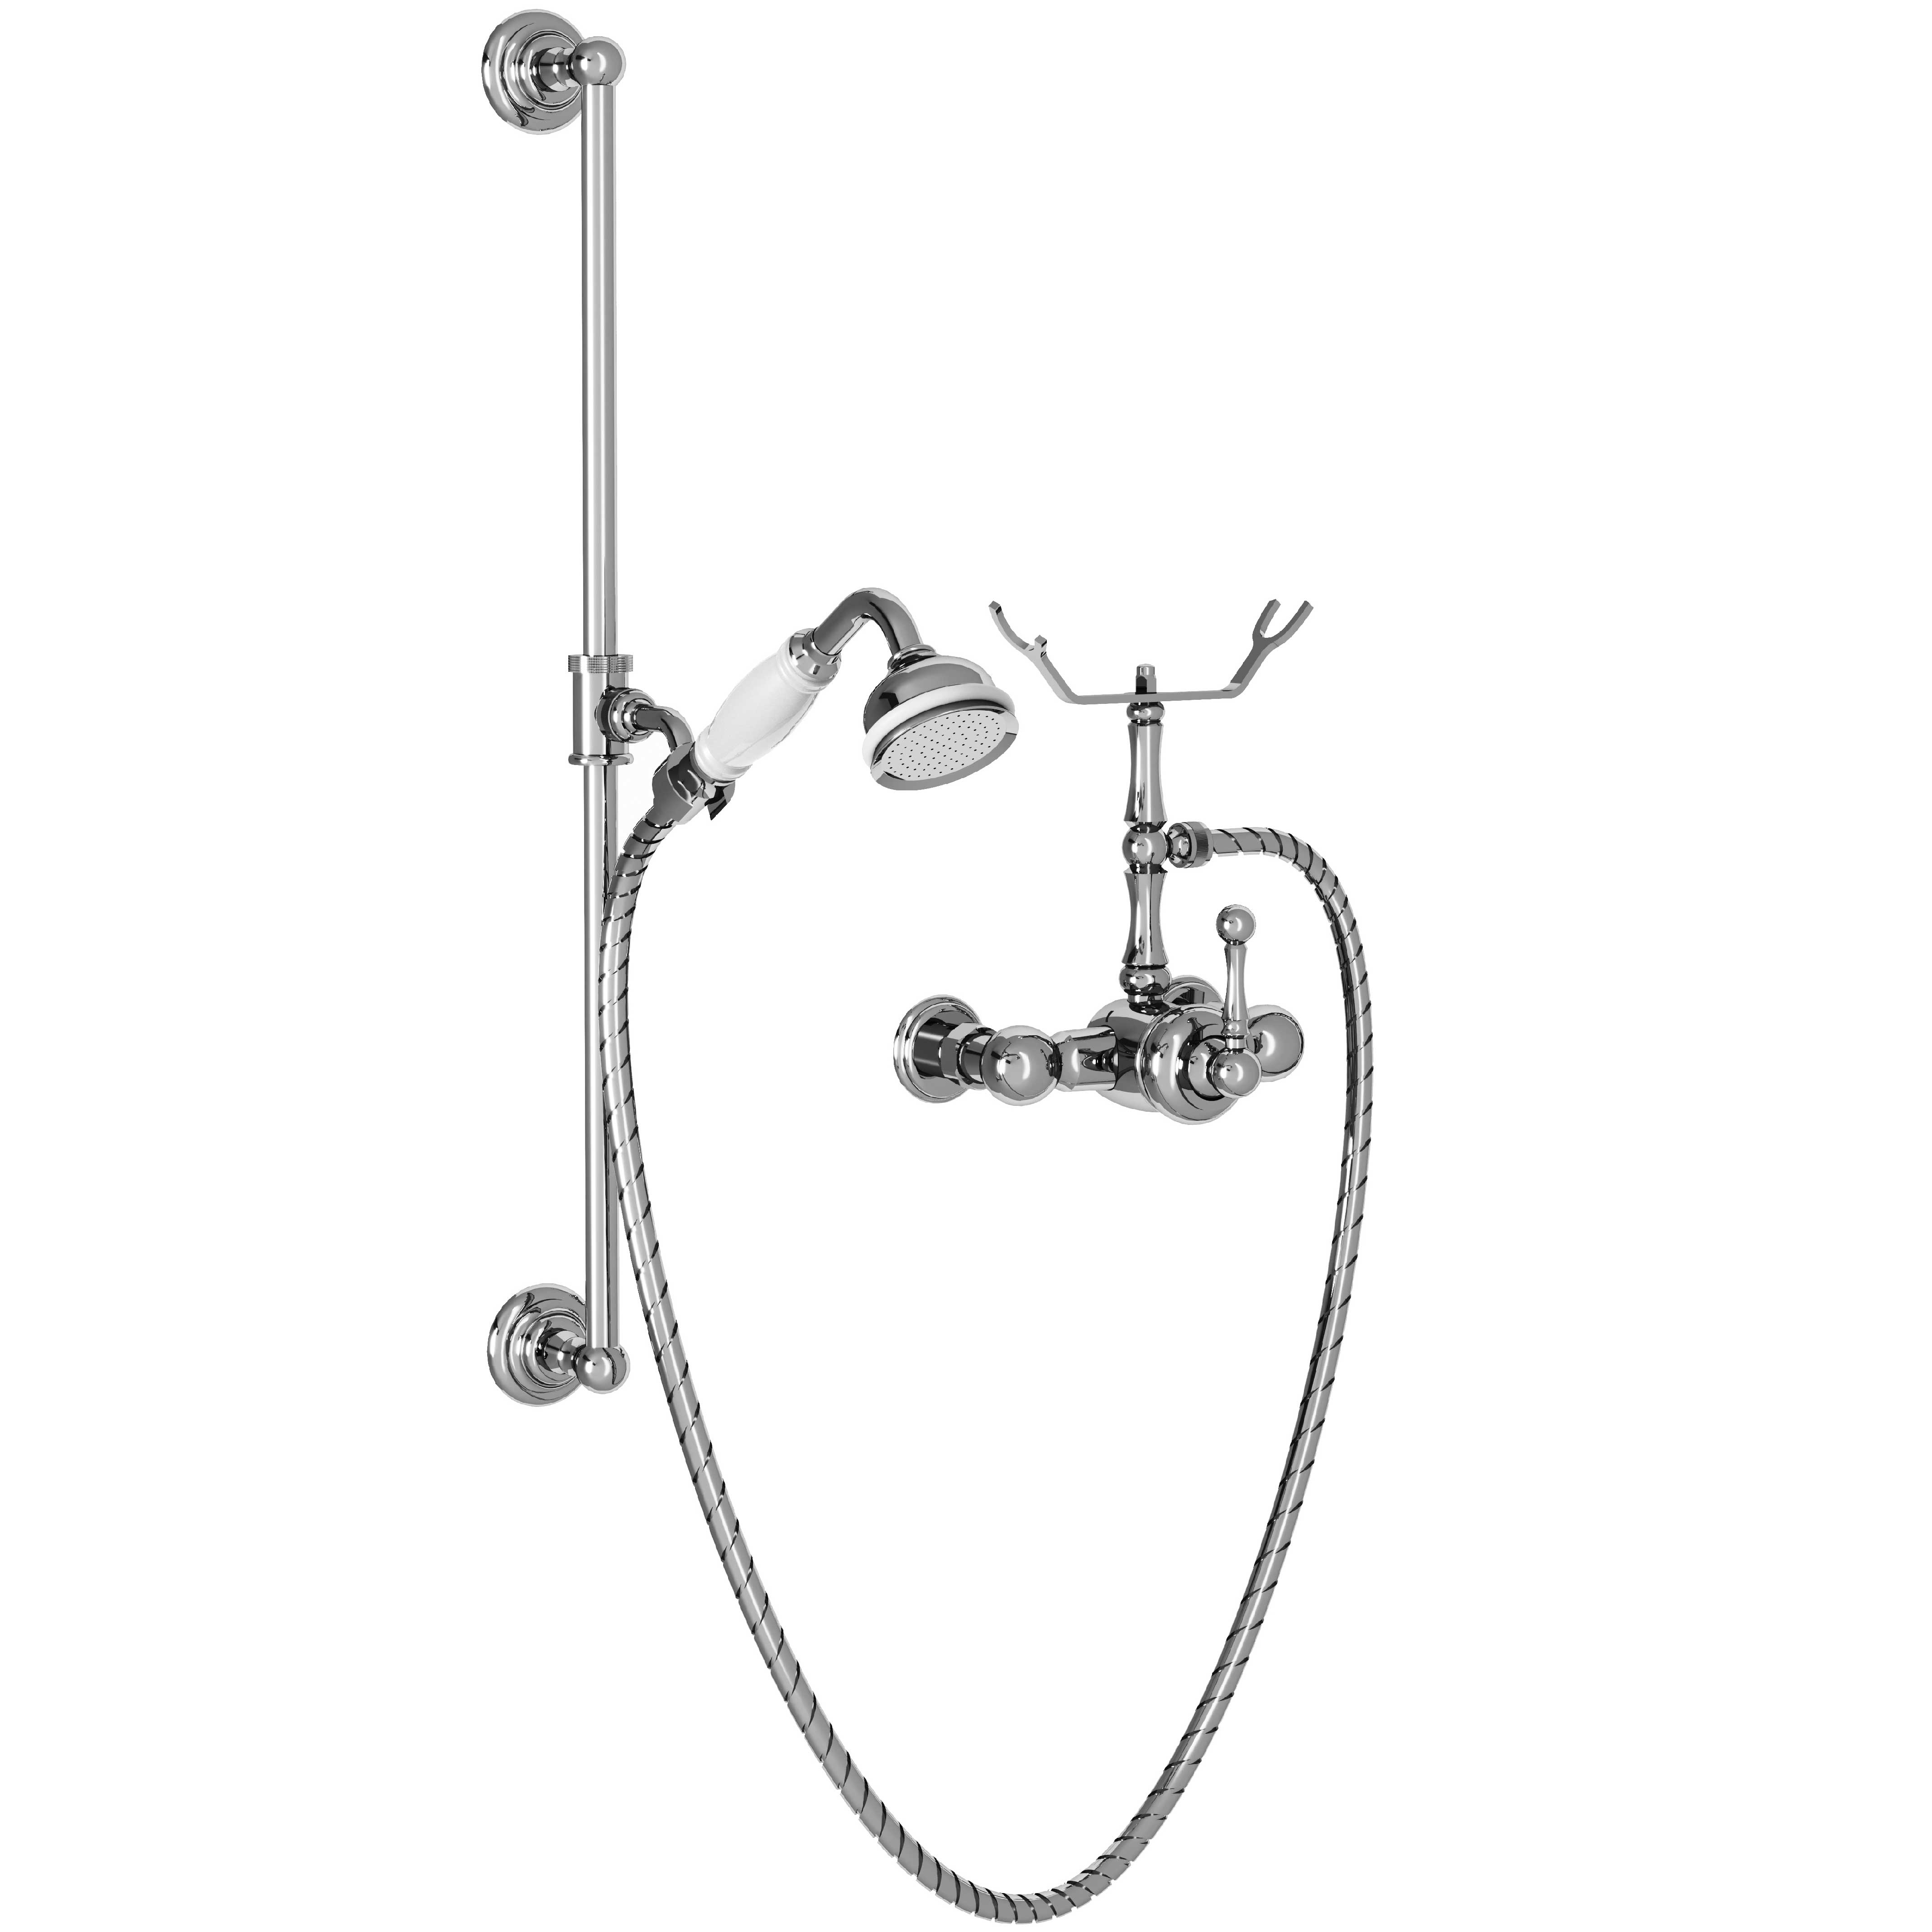 M20-2202M Single-lever shower mixer with sliding bar